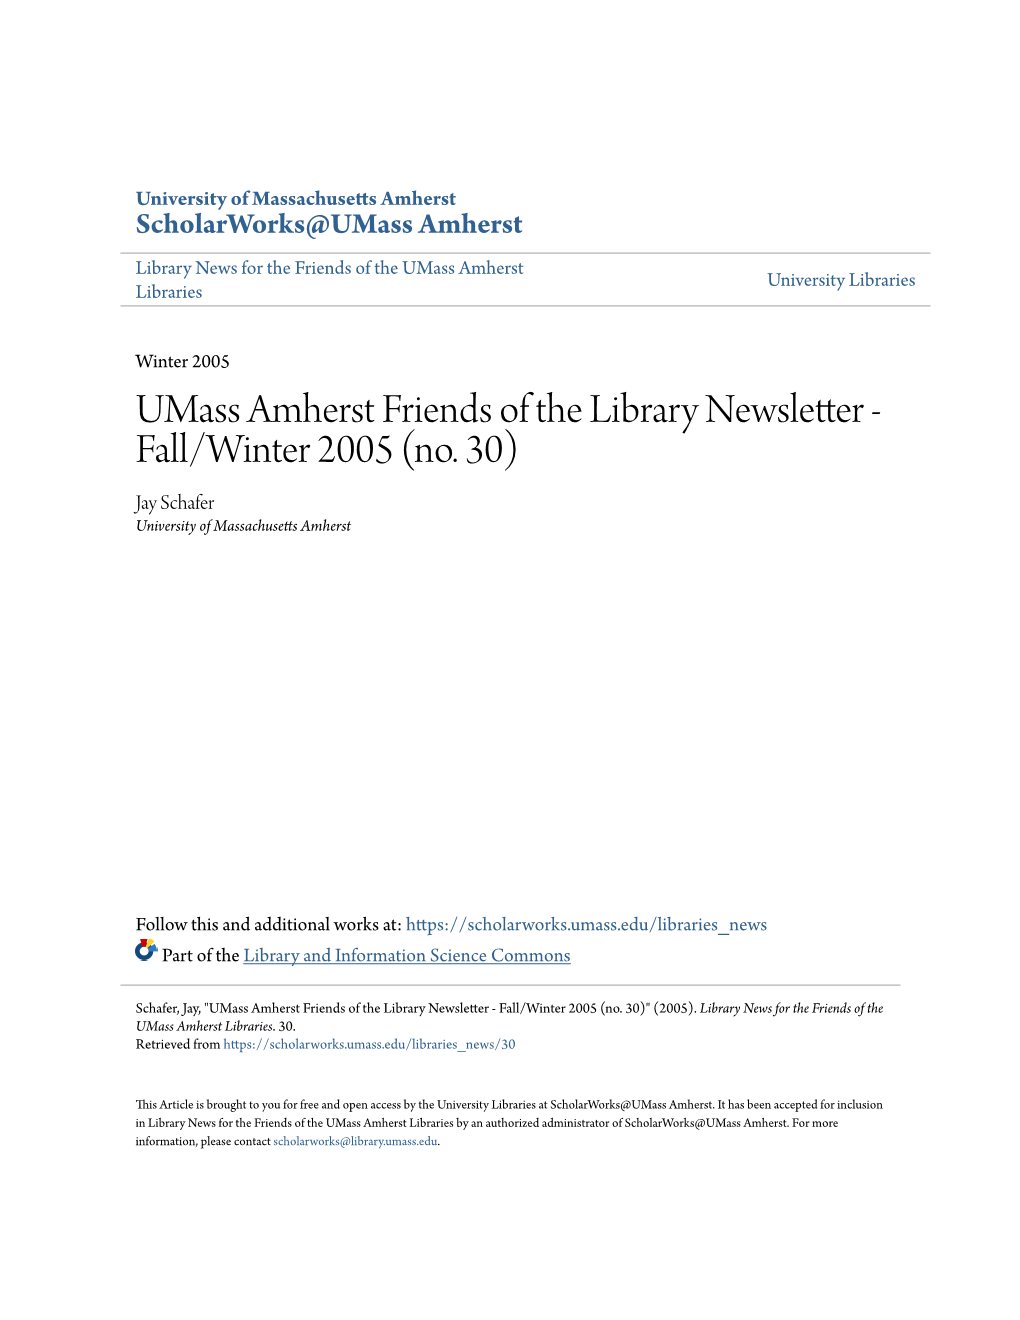 Umass Amherst Friends of the Library Newsletter - Fall/Winter 2005 (No